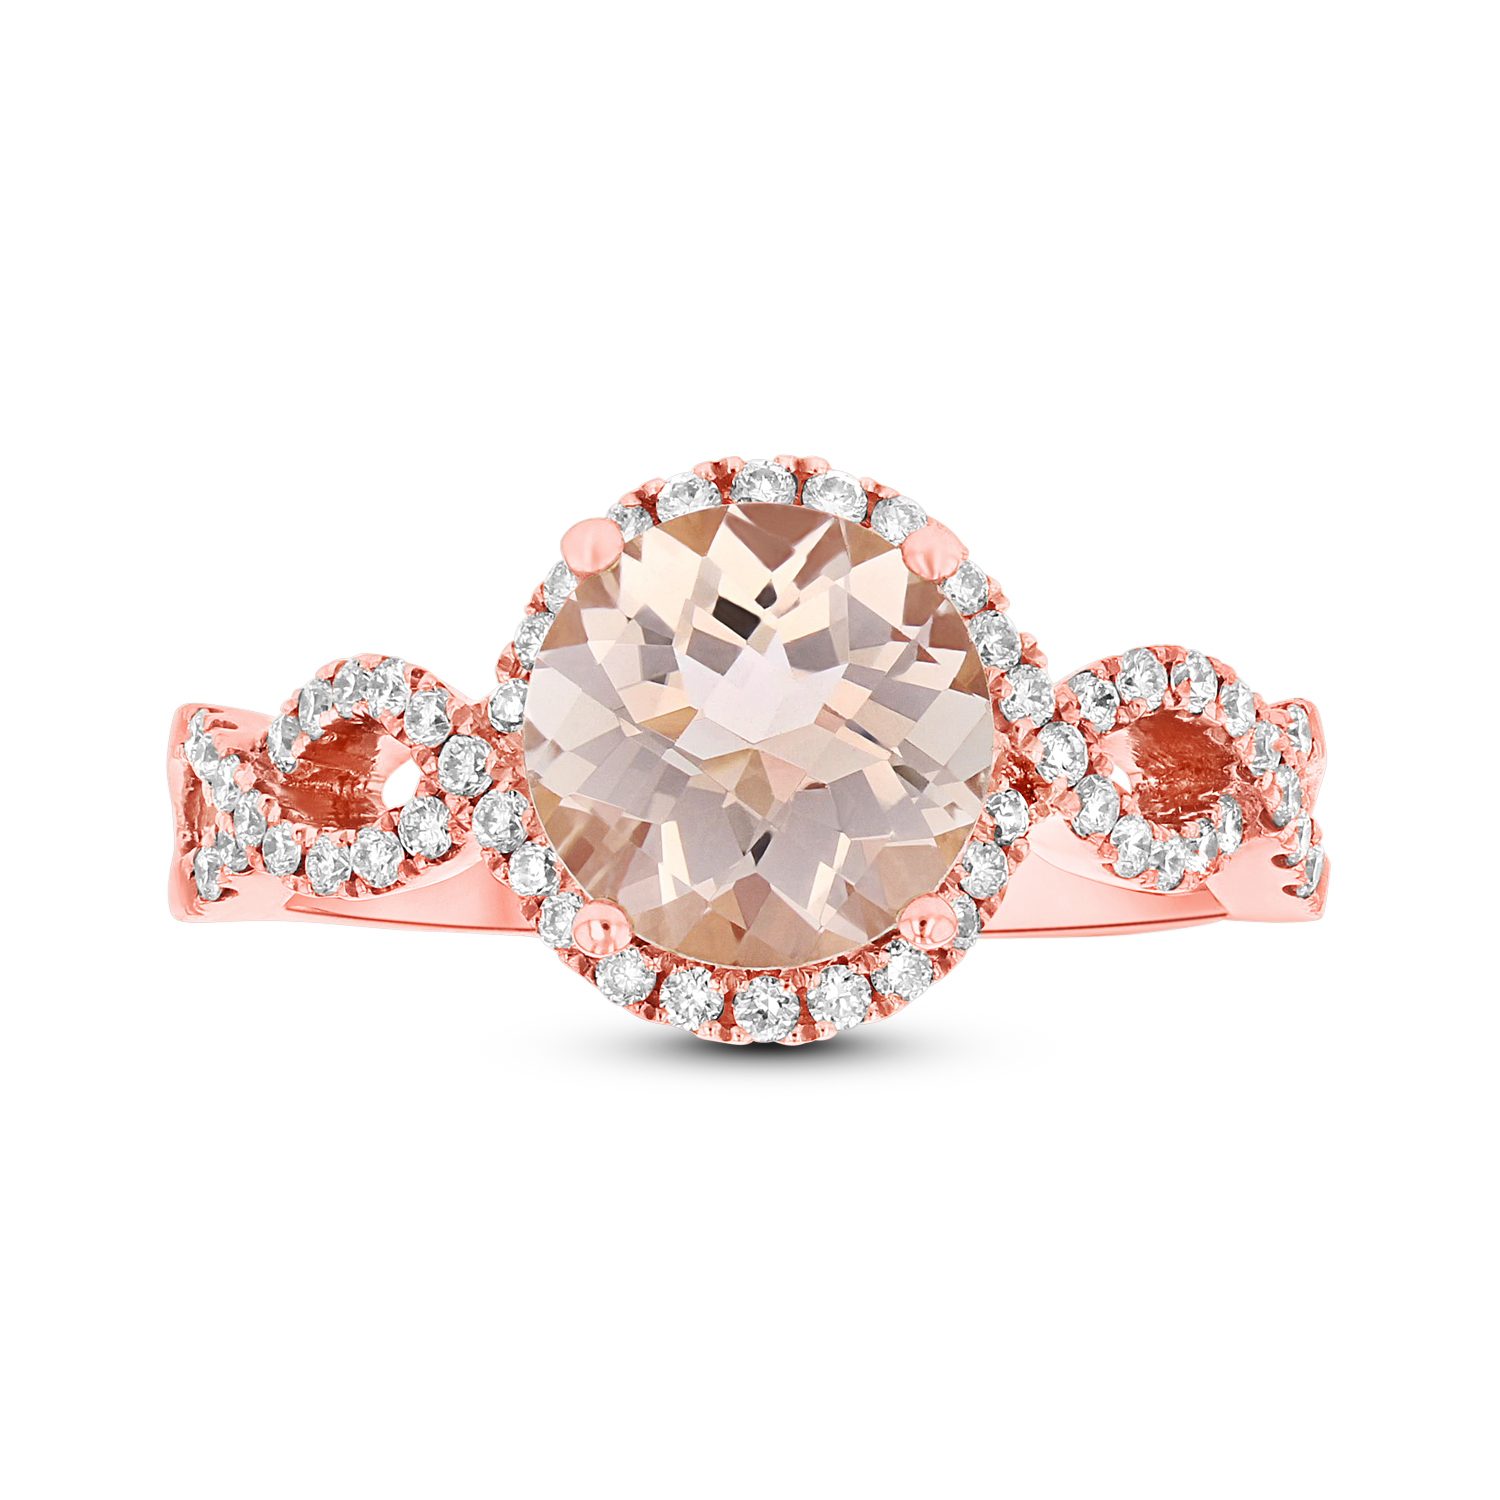 View Diamond and 8mm Round Morganite Ring in 14k Rose Gold